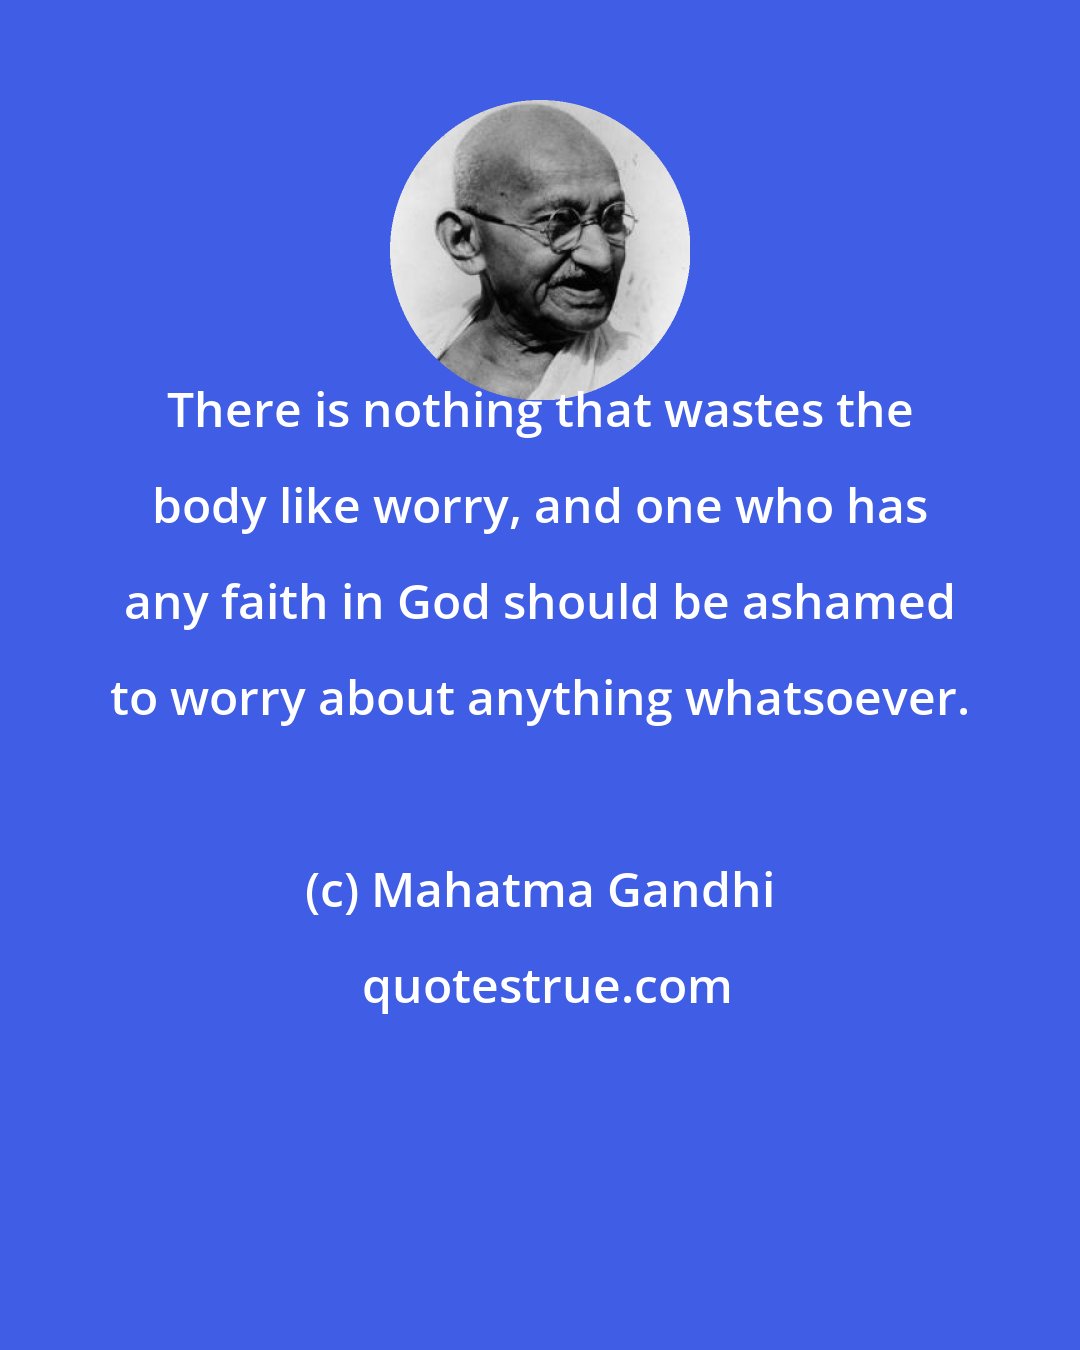 Mahatma Gandhi: There is nothing that wastes the body like worry, and one who has any faith in God should be ashamed to worry about anything whatsoever.